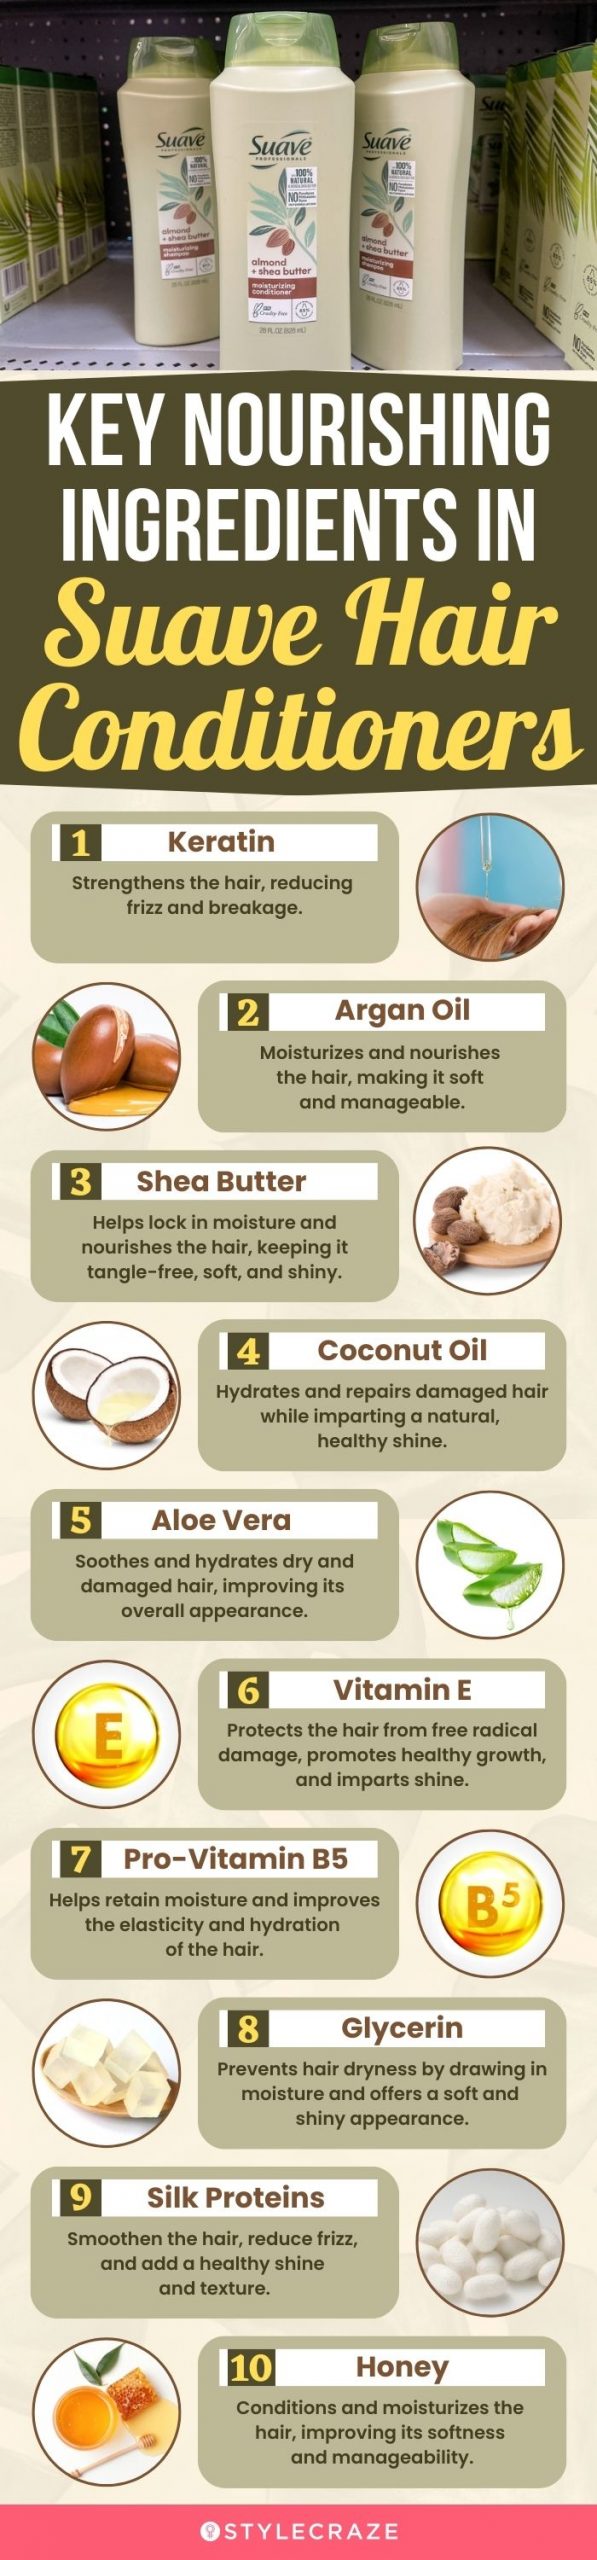 Nourishing Ingredients In Suave Hair Conditioners (infographic)